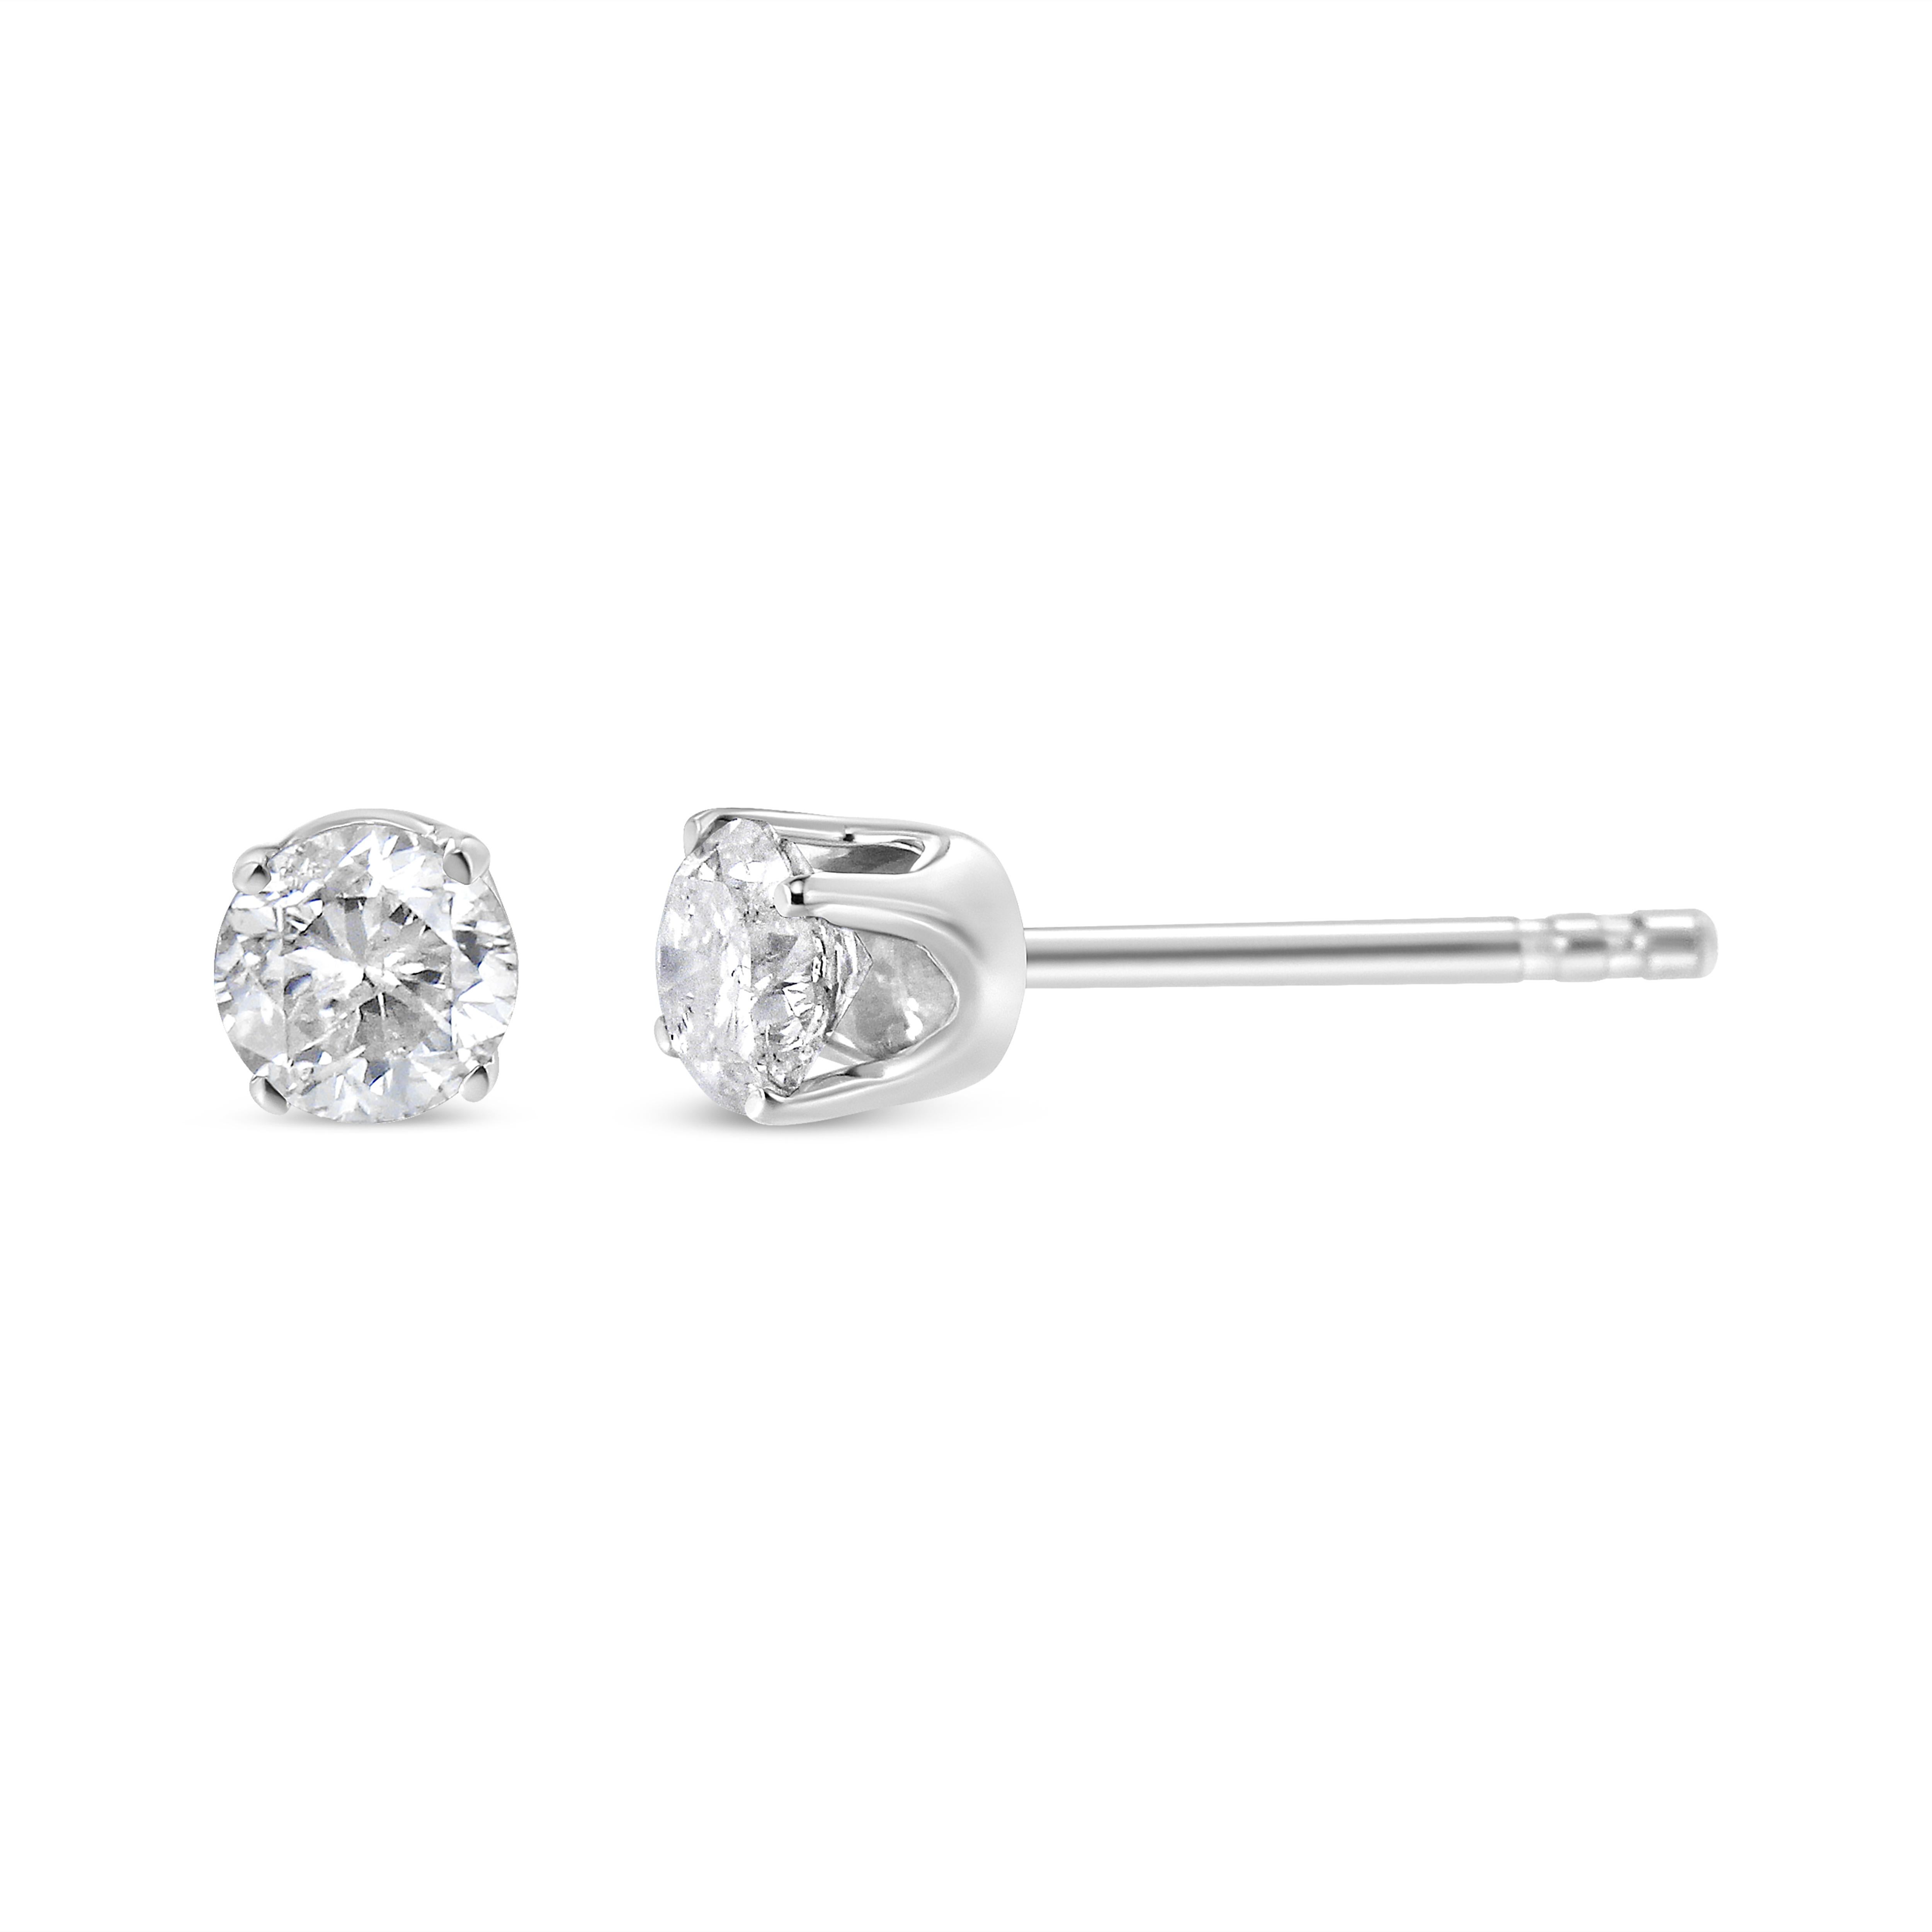 Contemporary AGS Certified 14K White Gold 1.0 Carat Solitaire Diamond Push Back Stud Earrings For Sale